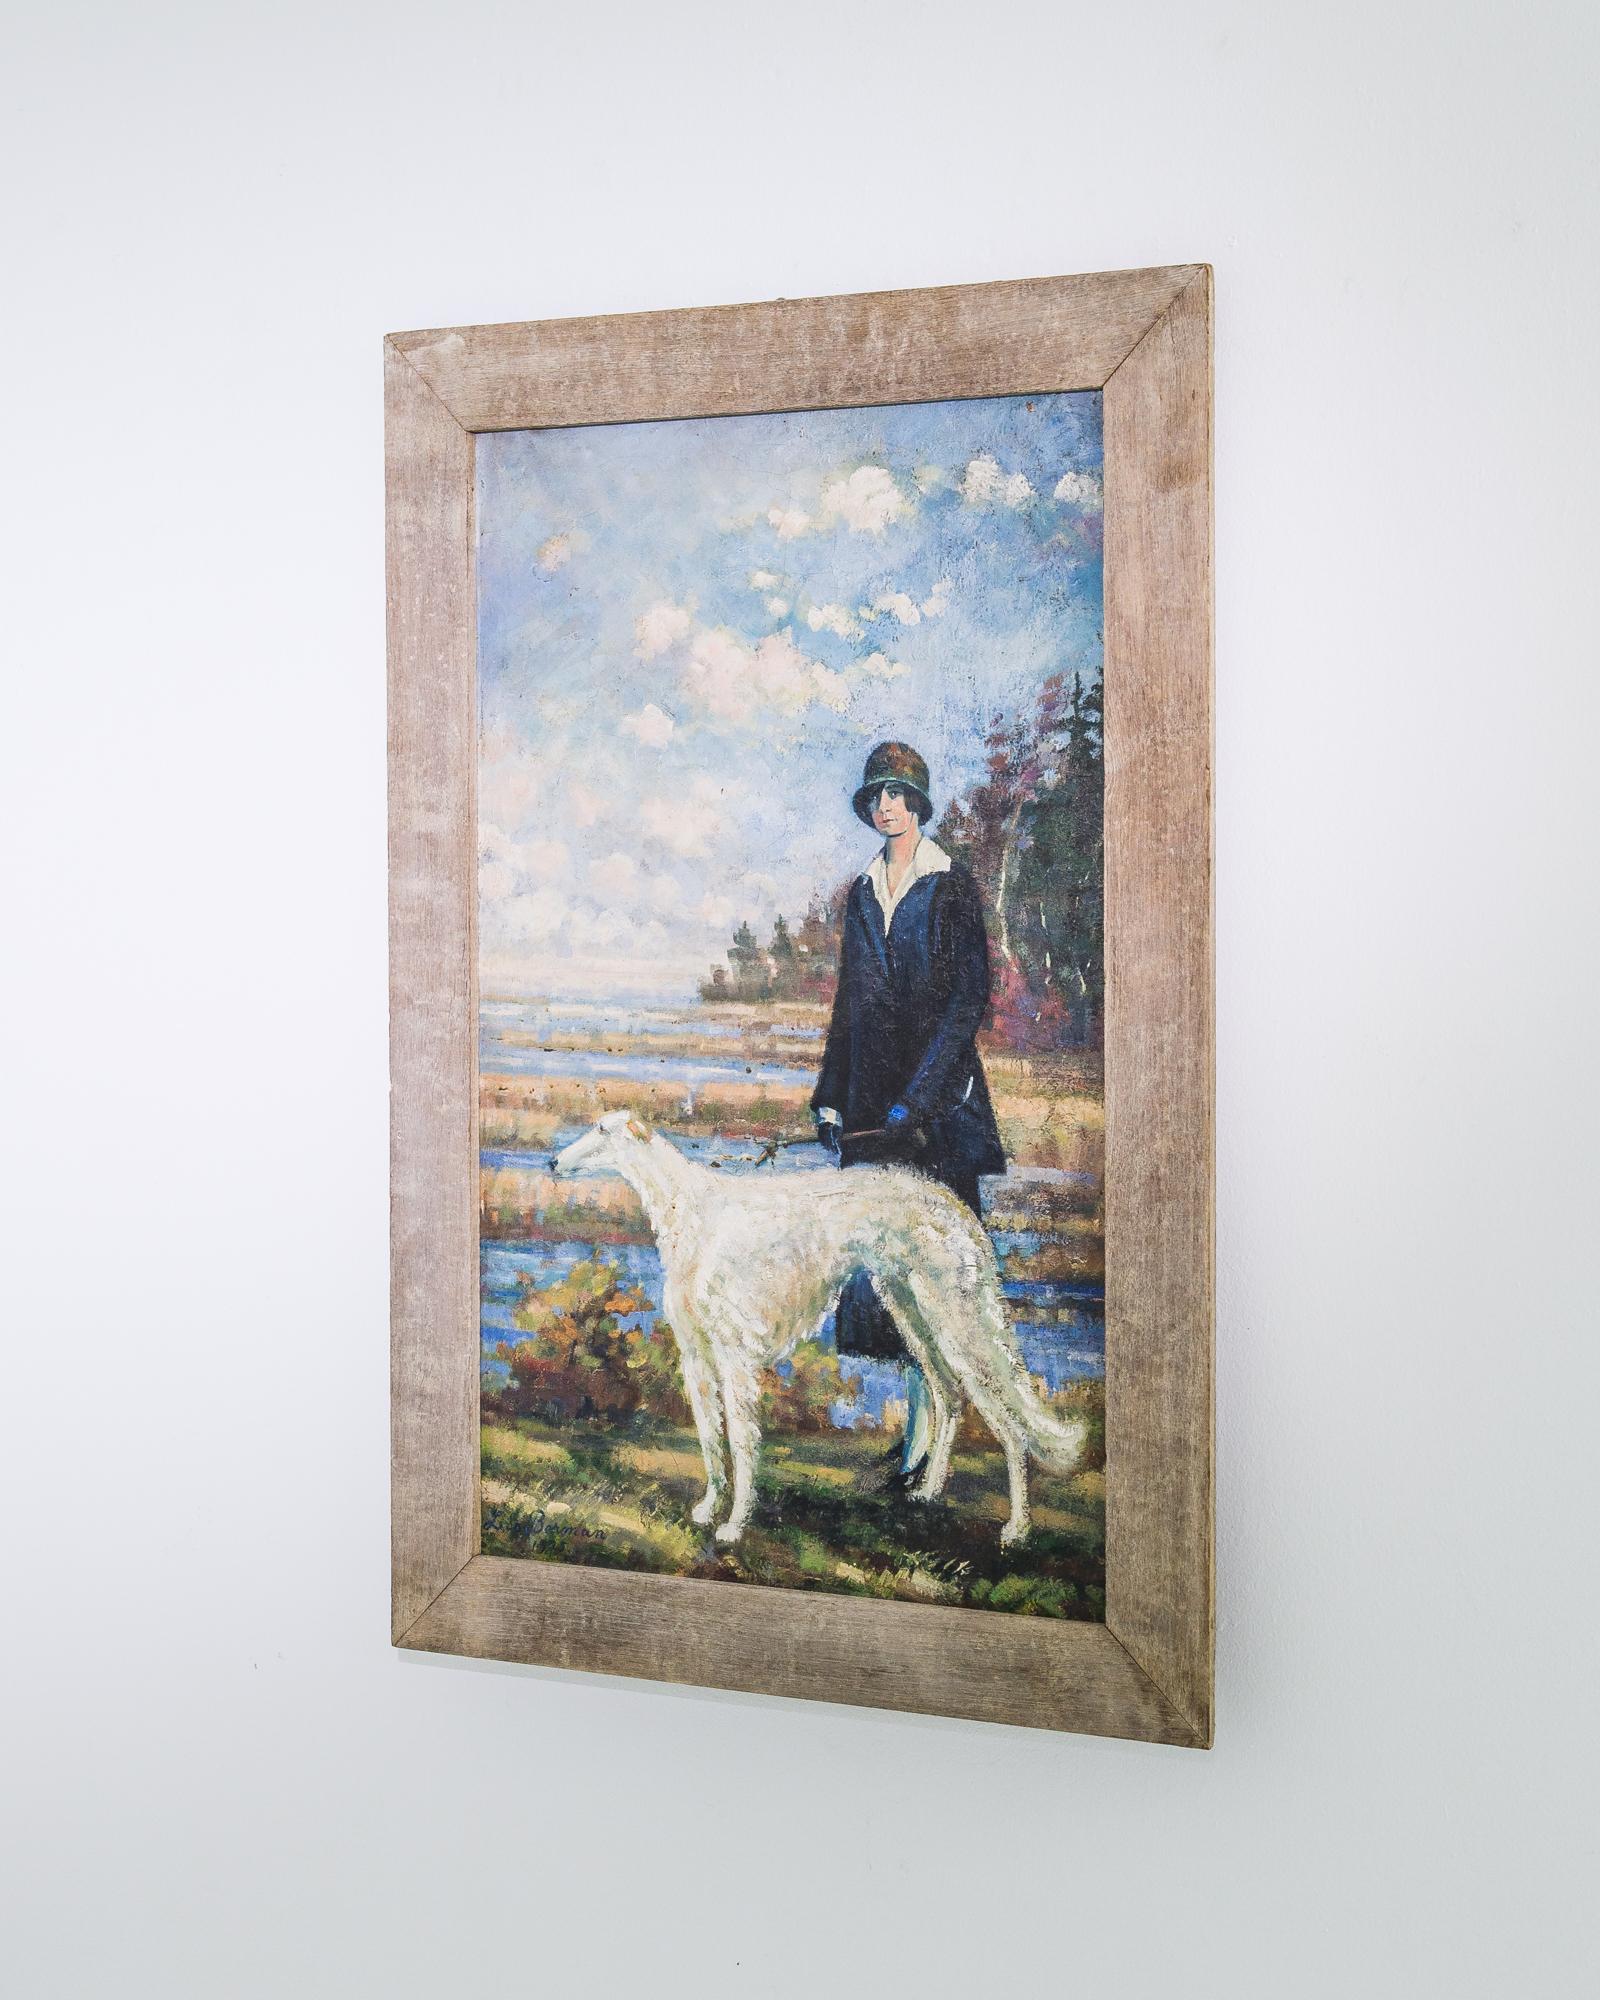 A painting in a wooden frame, depicting a woman in a marshland landscape with a large white dog. The date of the painting and the name of the artist can be found in the lower left hand corner: Lisa Borman, 1925. The loose, spontaneous brushstrokes